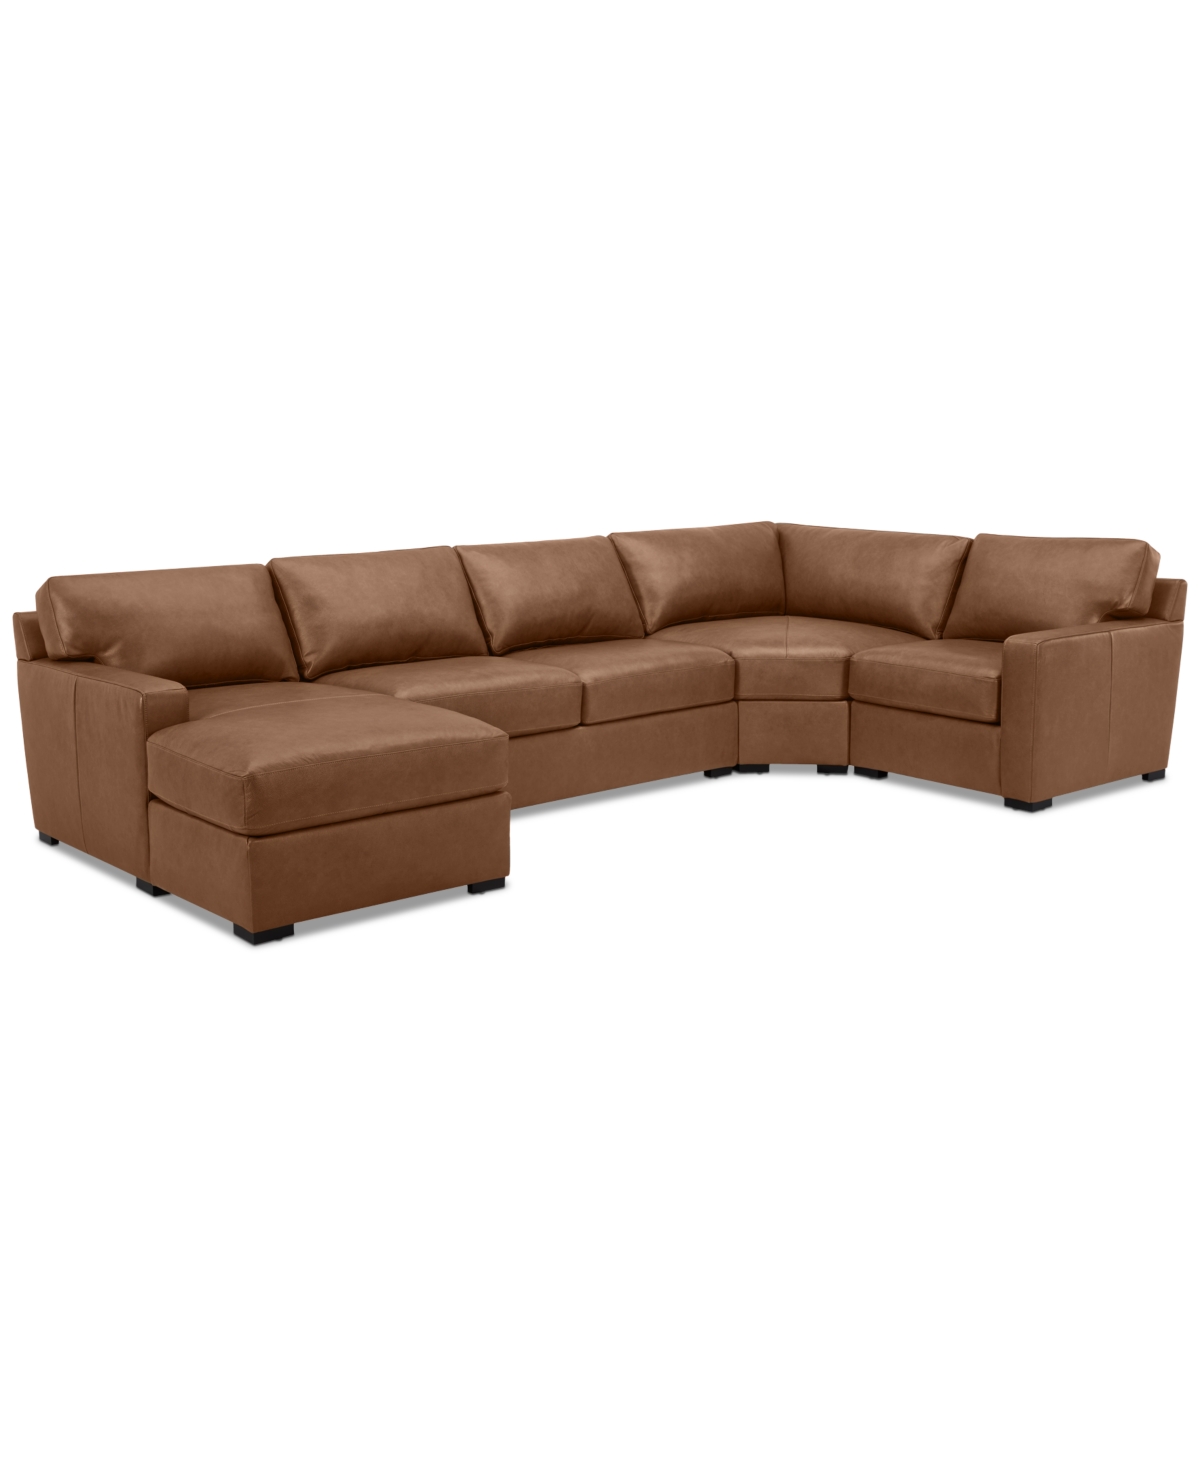 Macy's Radley 148" 4-pc. Leather Wedge Modular Chaise Sectional, Created For  In Light Tan